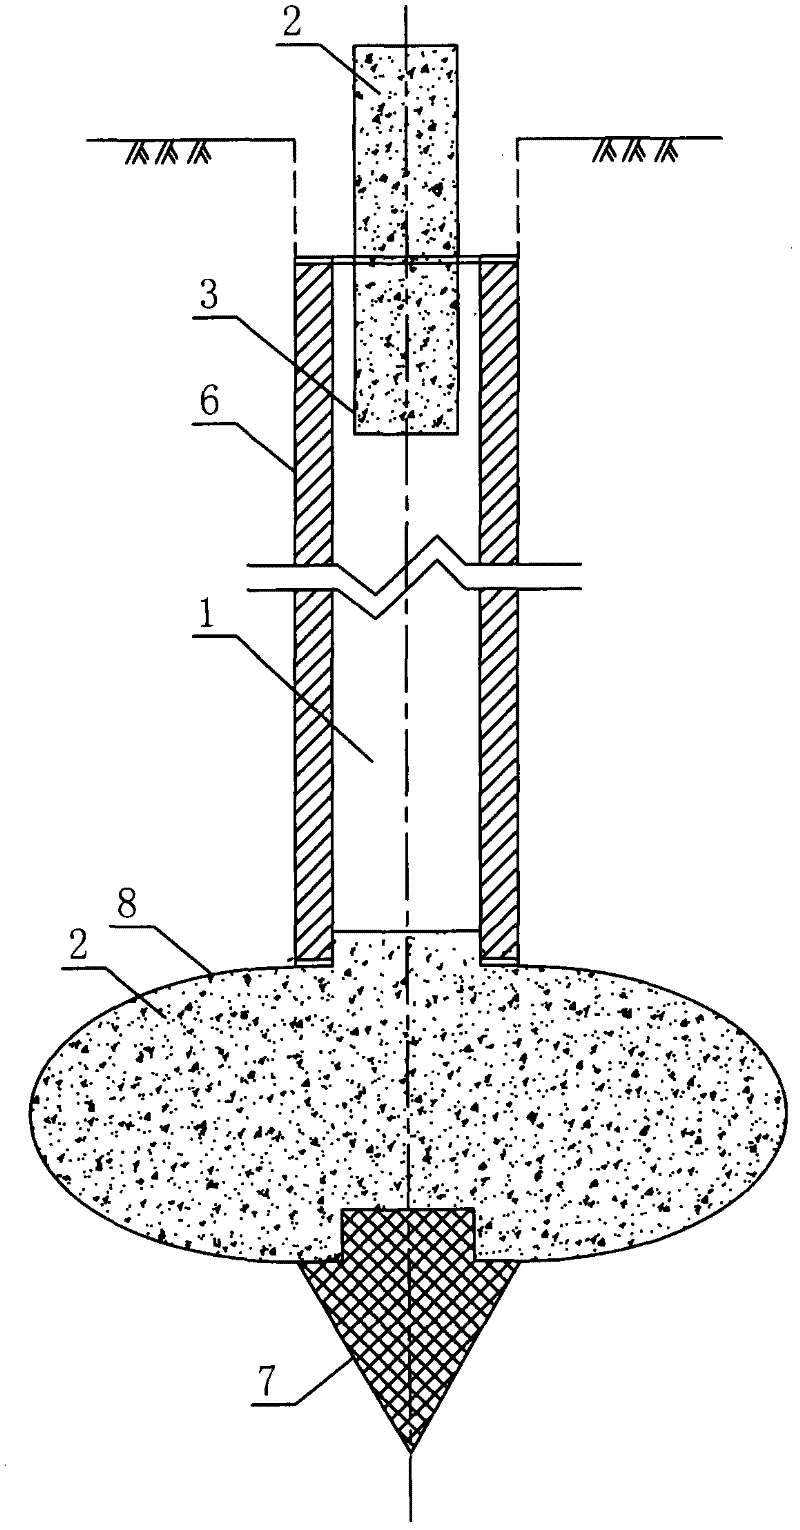 Construction method for concrete bagged pouring in small-diameter pile hole